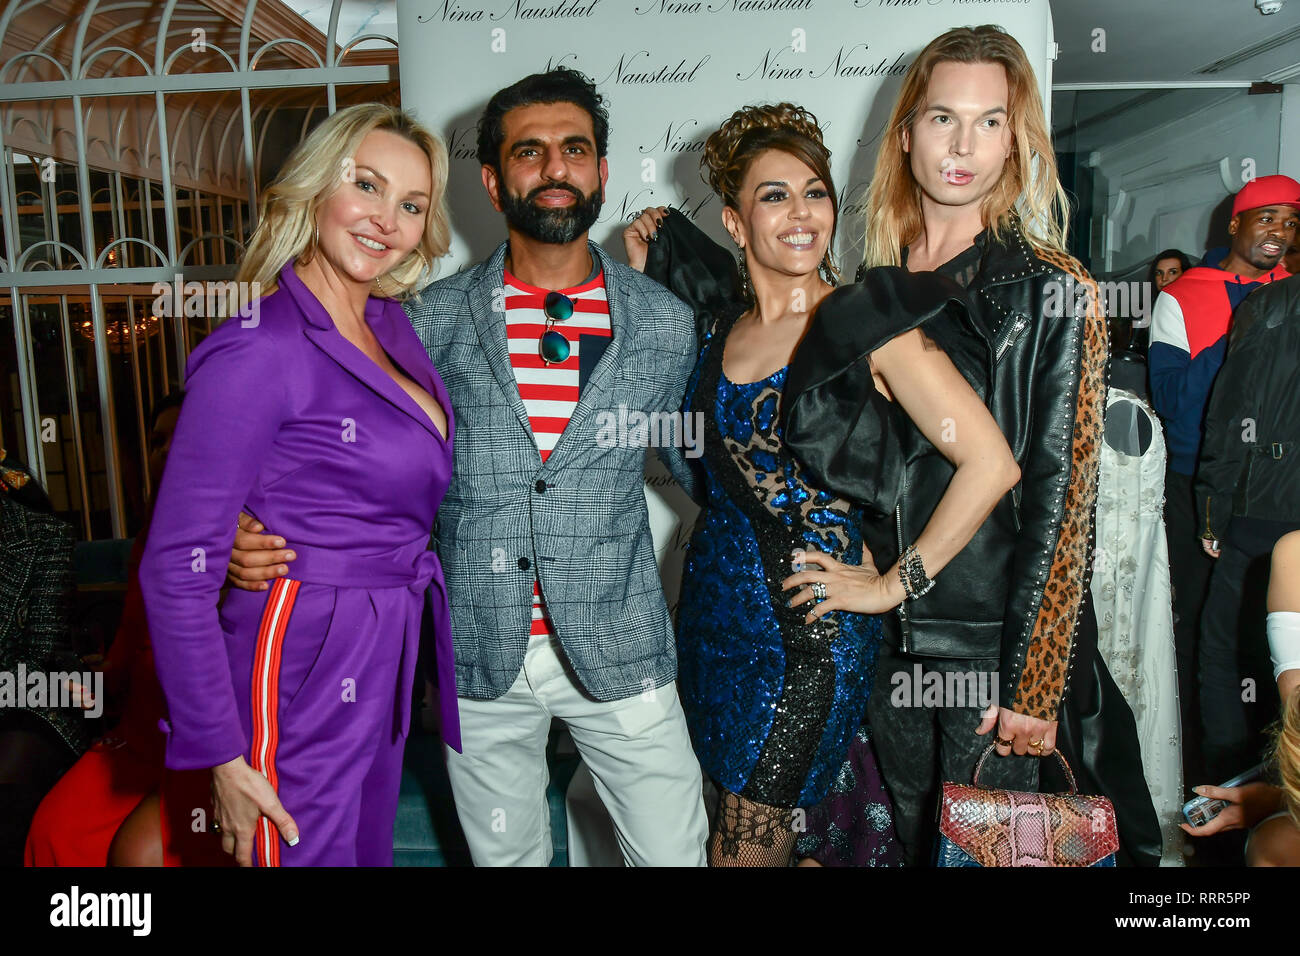 London, UK. 26th Feb 2019. Arrivers at Nina Naustdal catwalk show SS19/20 collection by The London School of Beauty & Make-up at Bagatelle on 26 Feb 2019, London, UK. Credit: Picture Capital/Alamy Live News Stock Photo